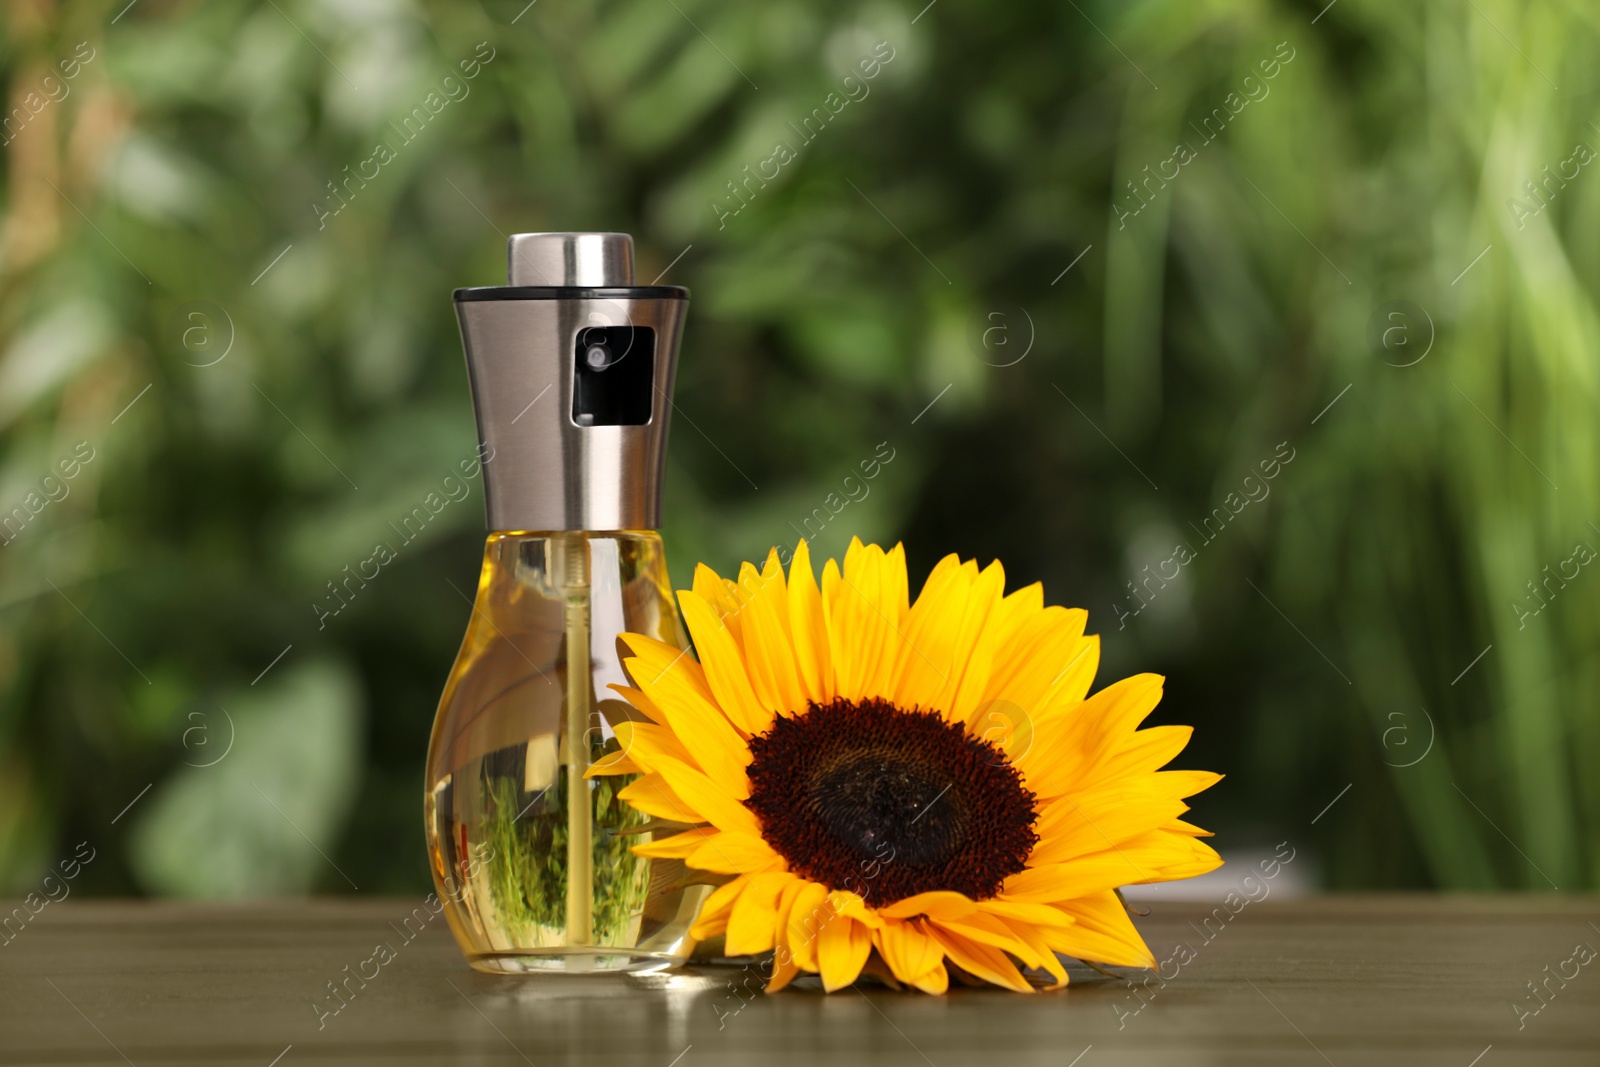 Photo of Sunflower and spray bottle with cooking oil on wooden table against blurred green background